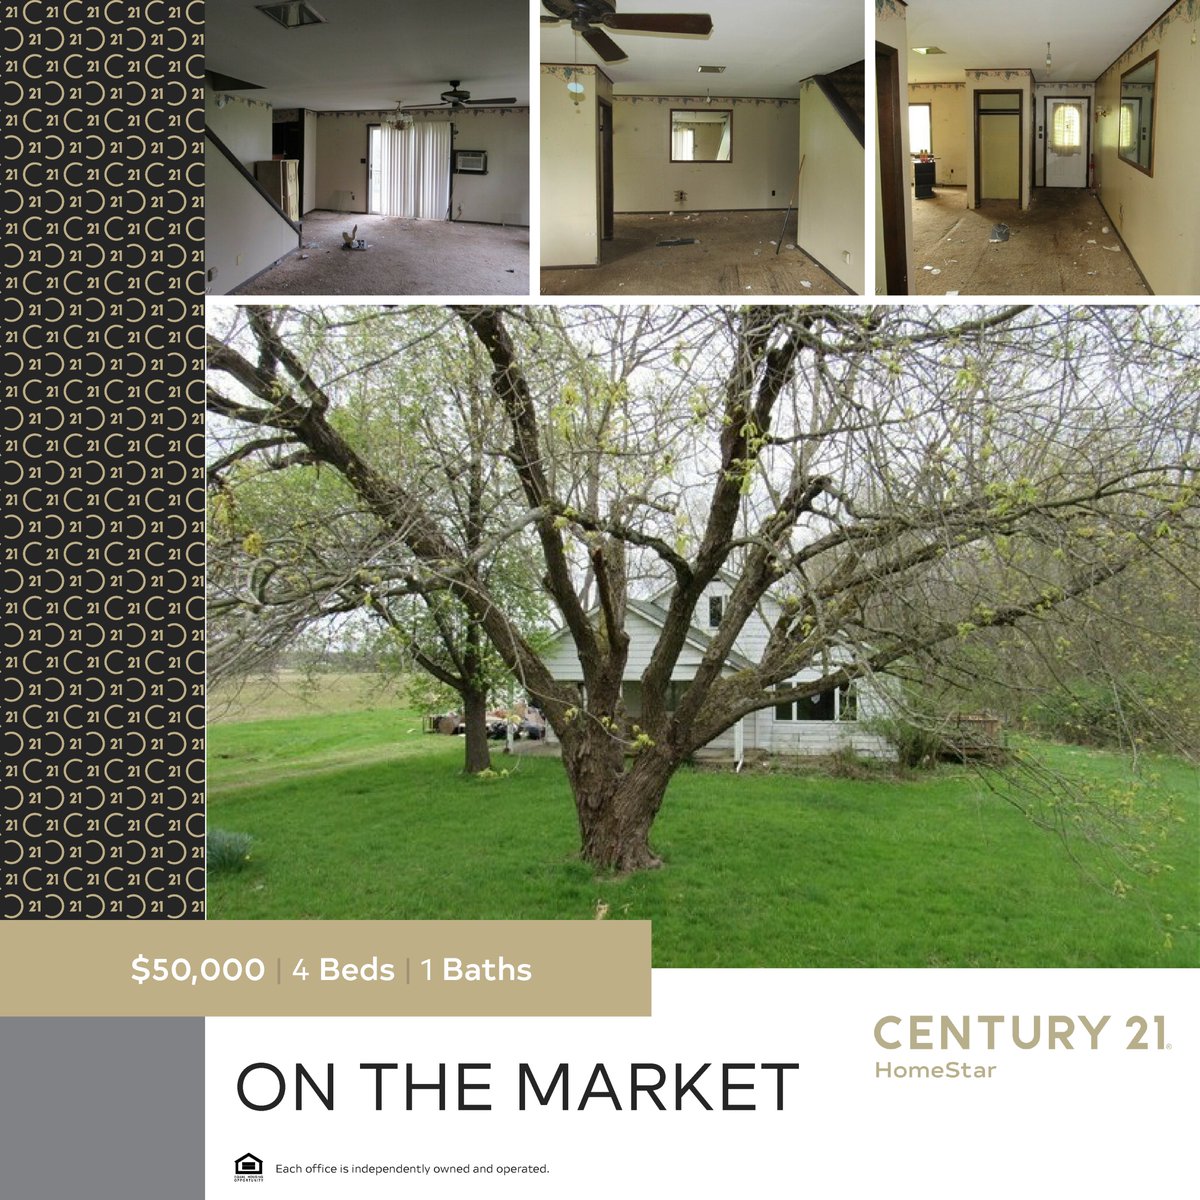 New Listing!  Investment opportunity.   This home has 4 bedrooms, an over sized 2 car garage and no basement.  Come and see. 

#investmentproperty #investment #newlisting #listingagent #sellersagent #realestateagent #letusbringyouhome